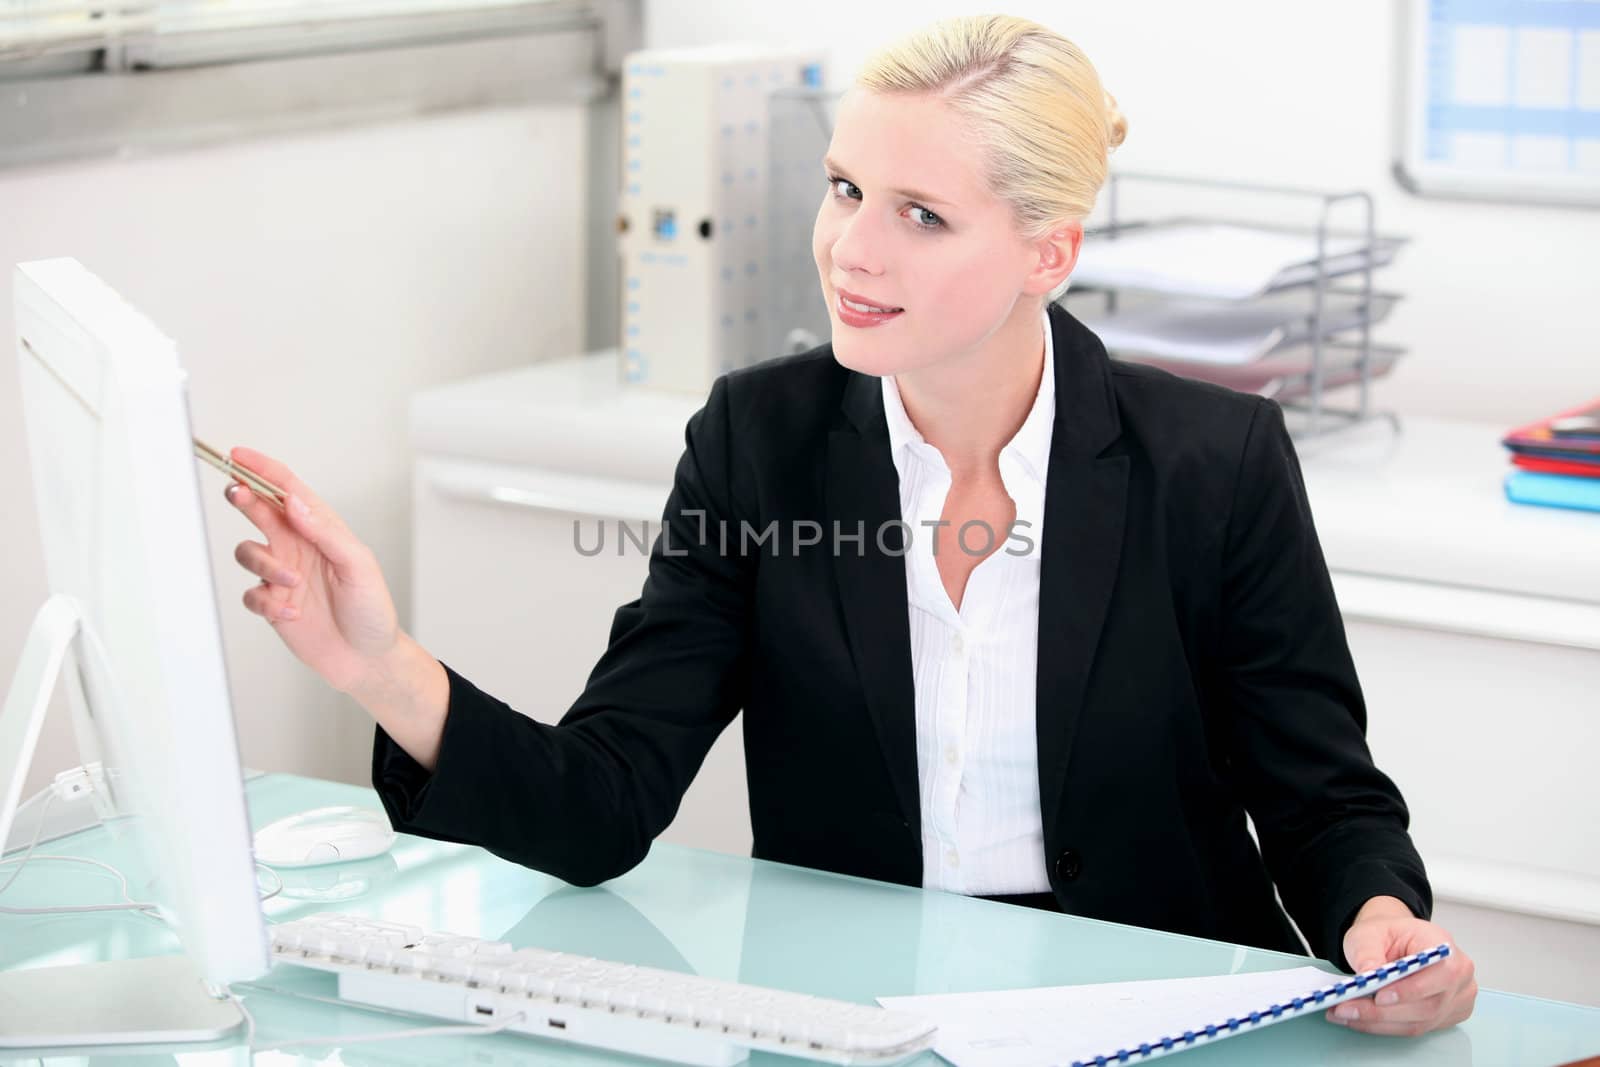 Blonde woman working at a clean modern desk by phovoir